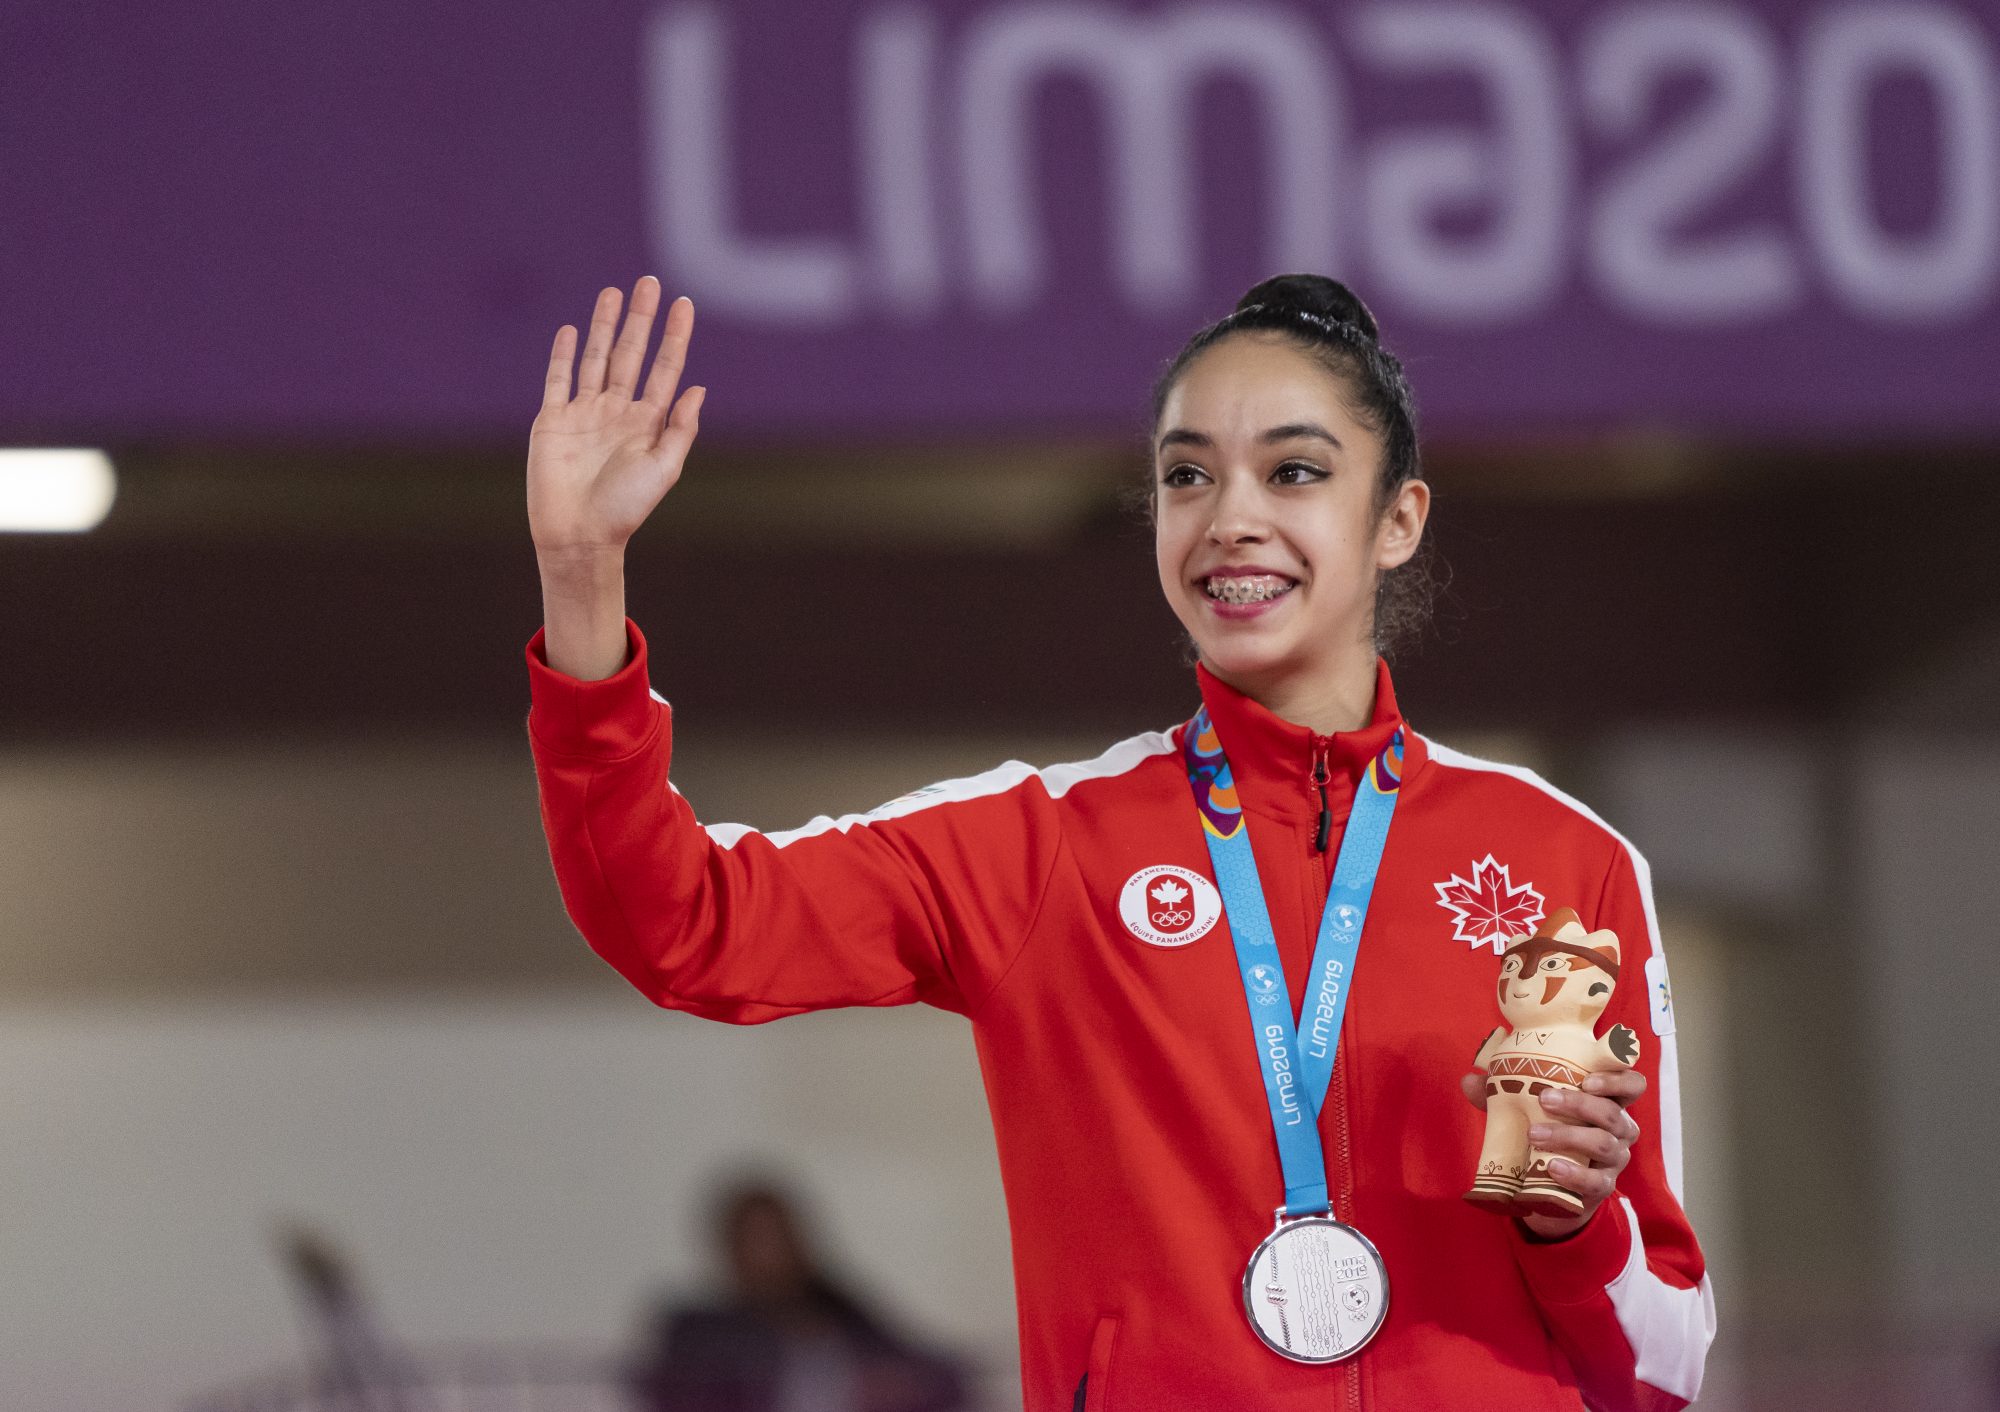 athlete waves while wearing her medal